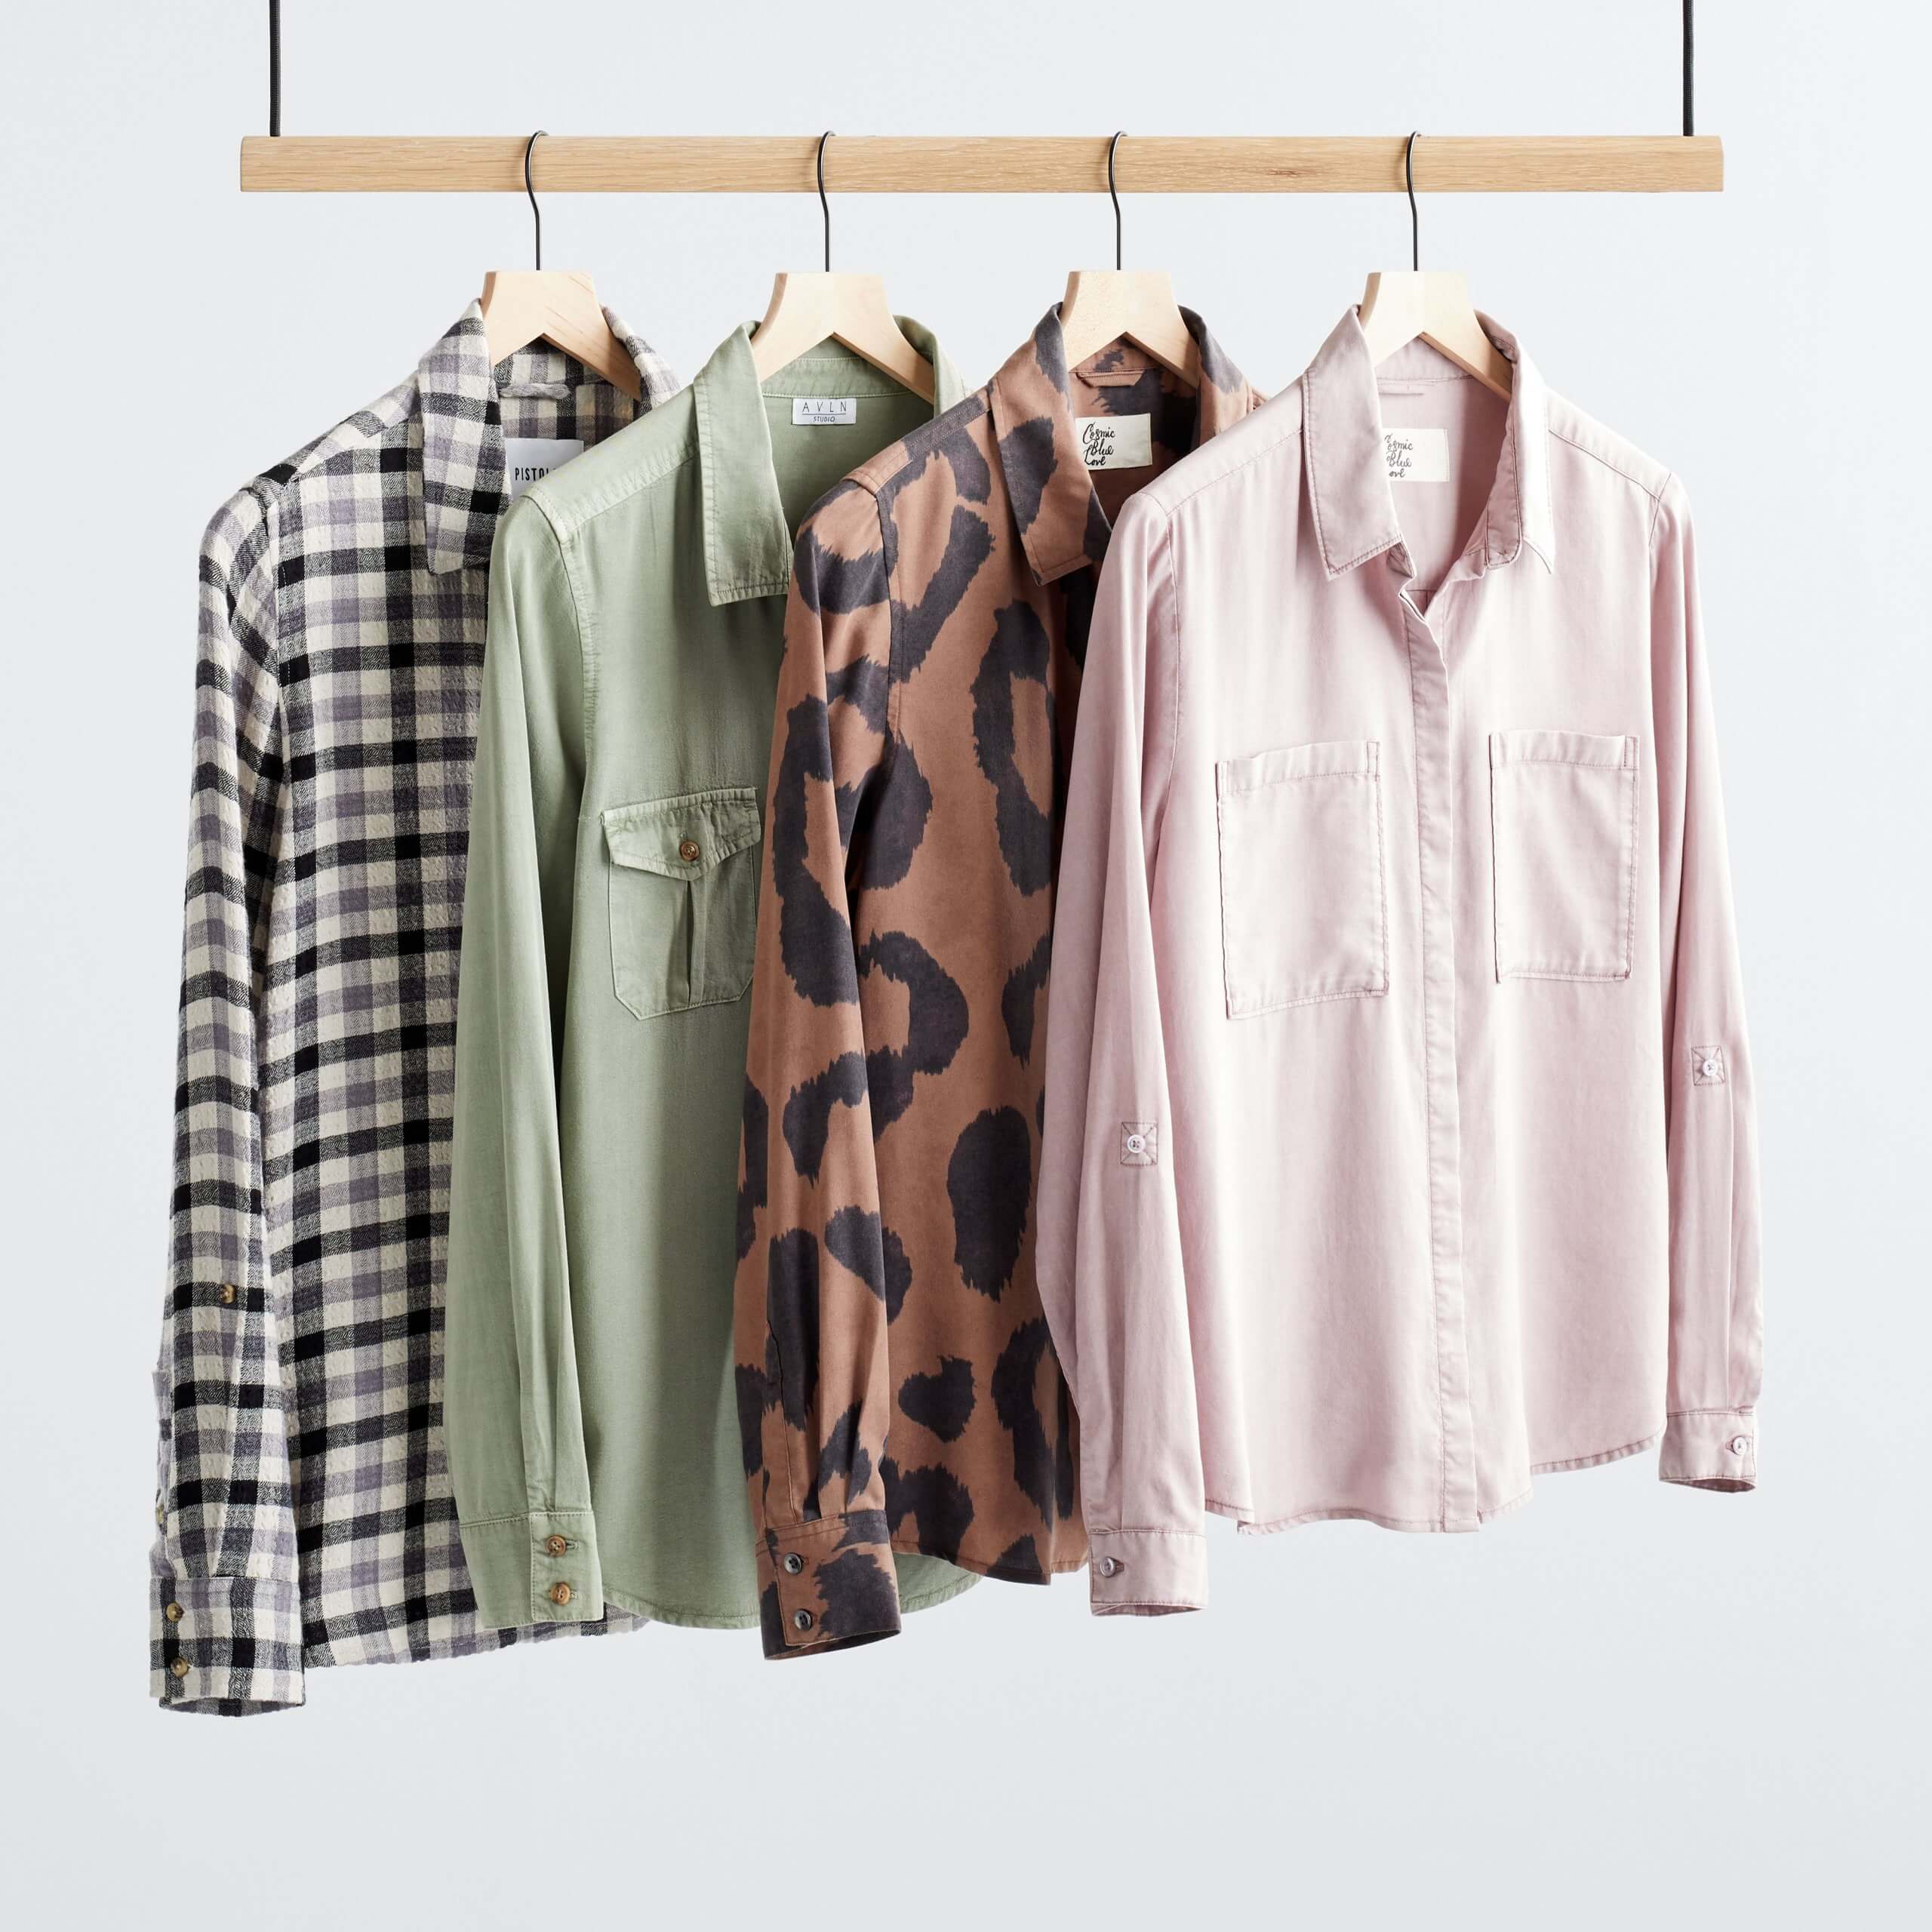 Stitch Fix Women’s rack featuring button-front shirts on wooden hangers in black and white plaid, olive green, brown leopard print and light pink.